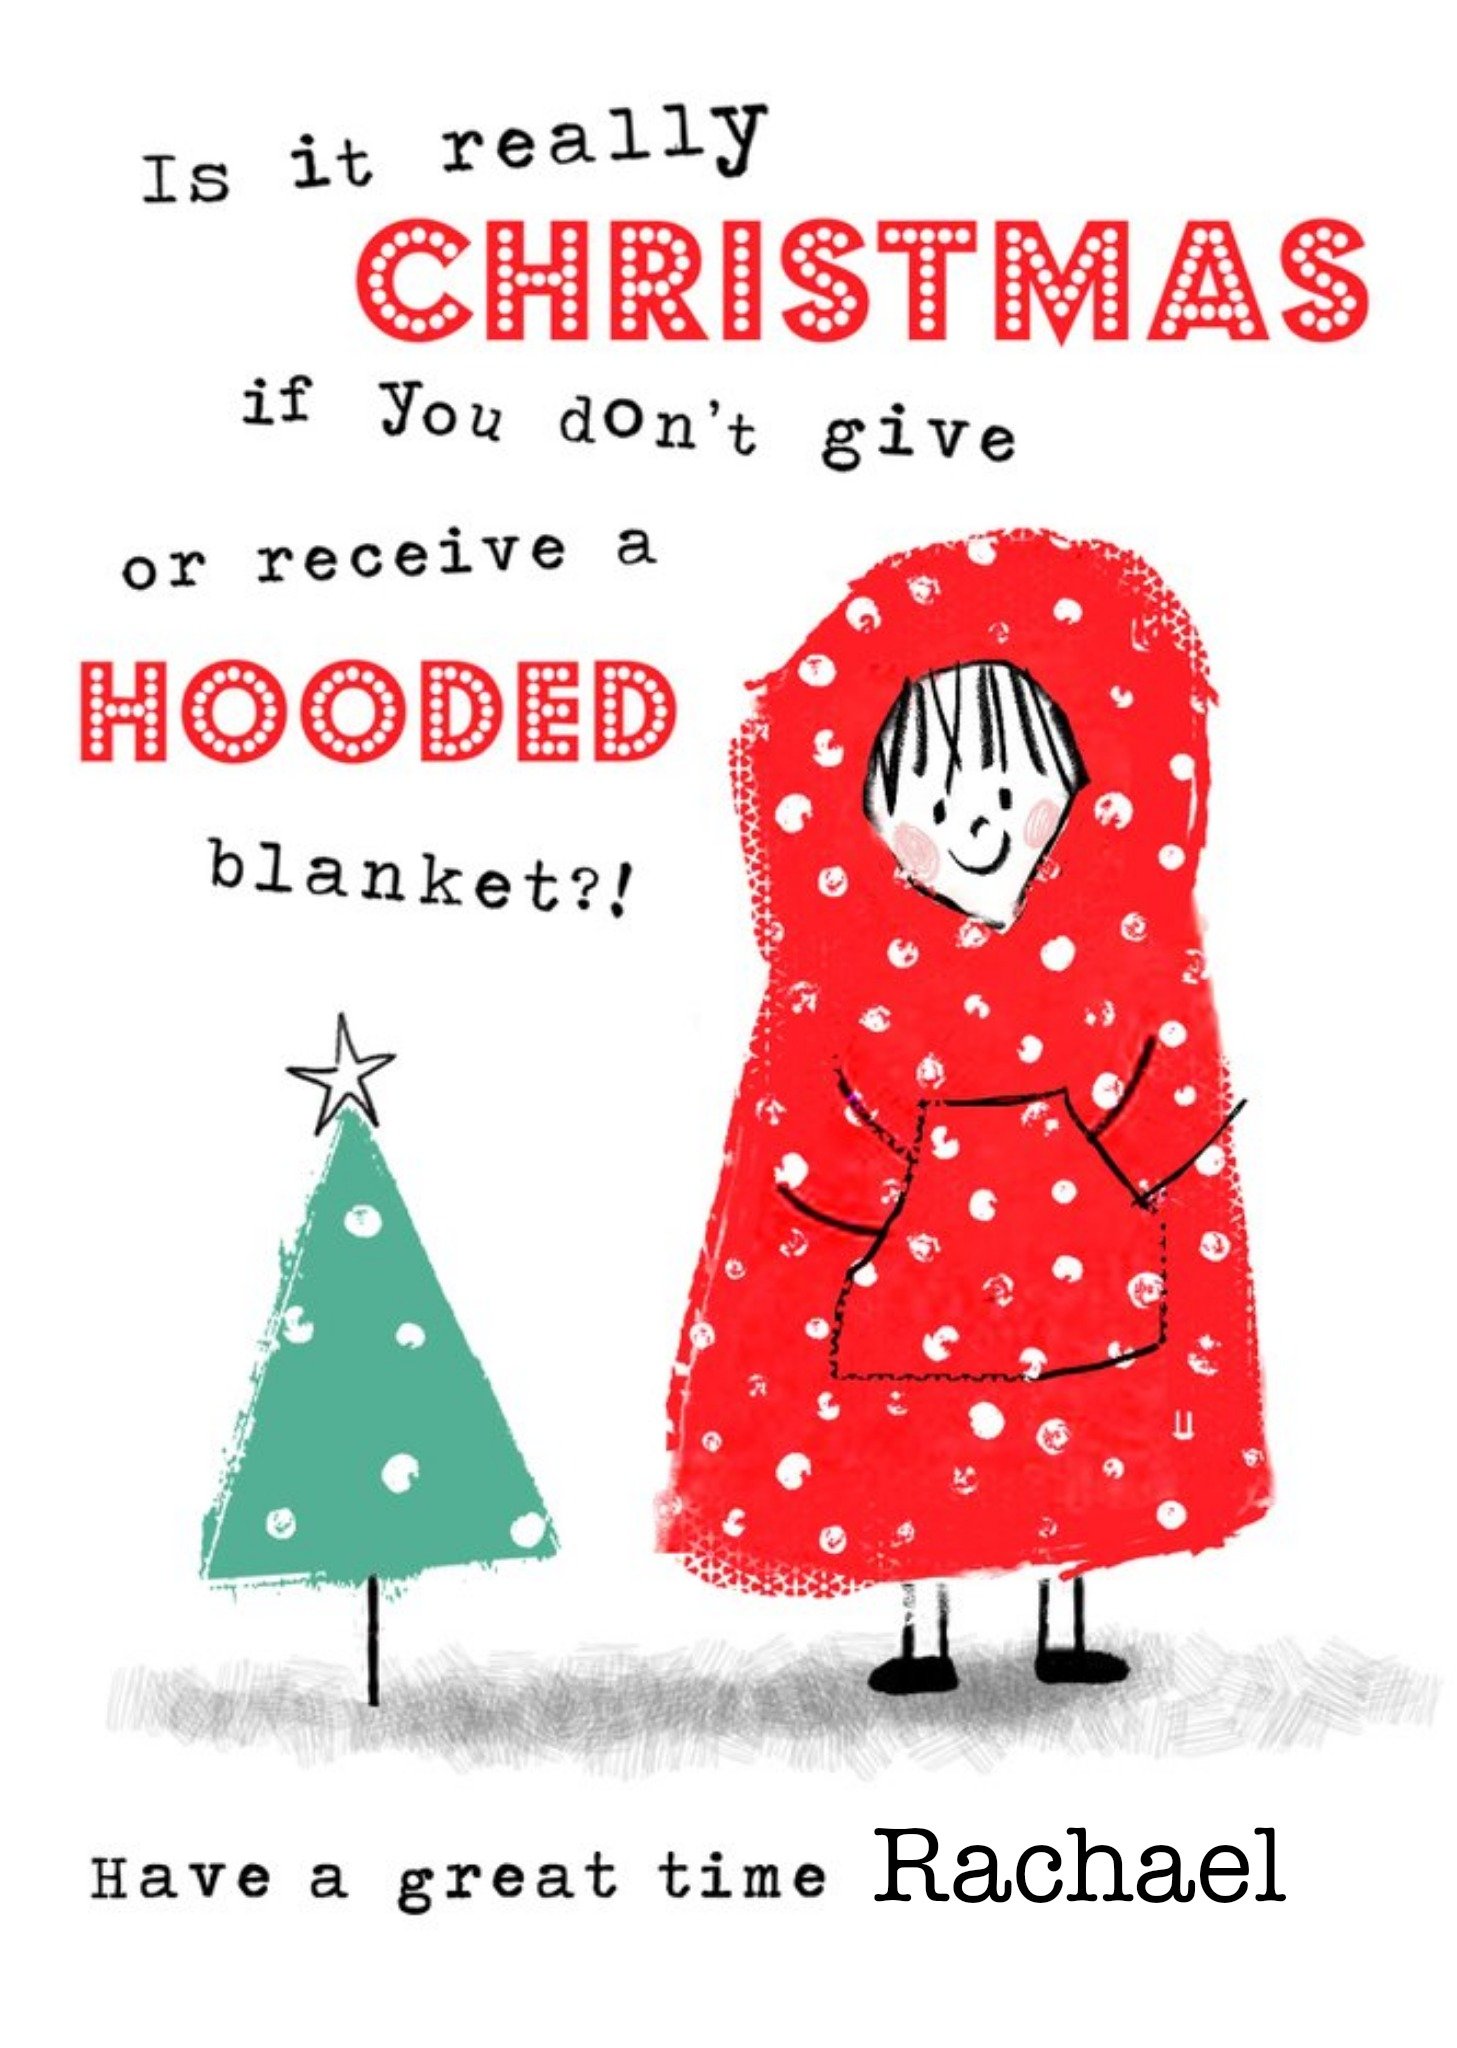 Moonpig A Hooded Blanket Christmas Card, Large